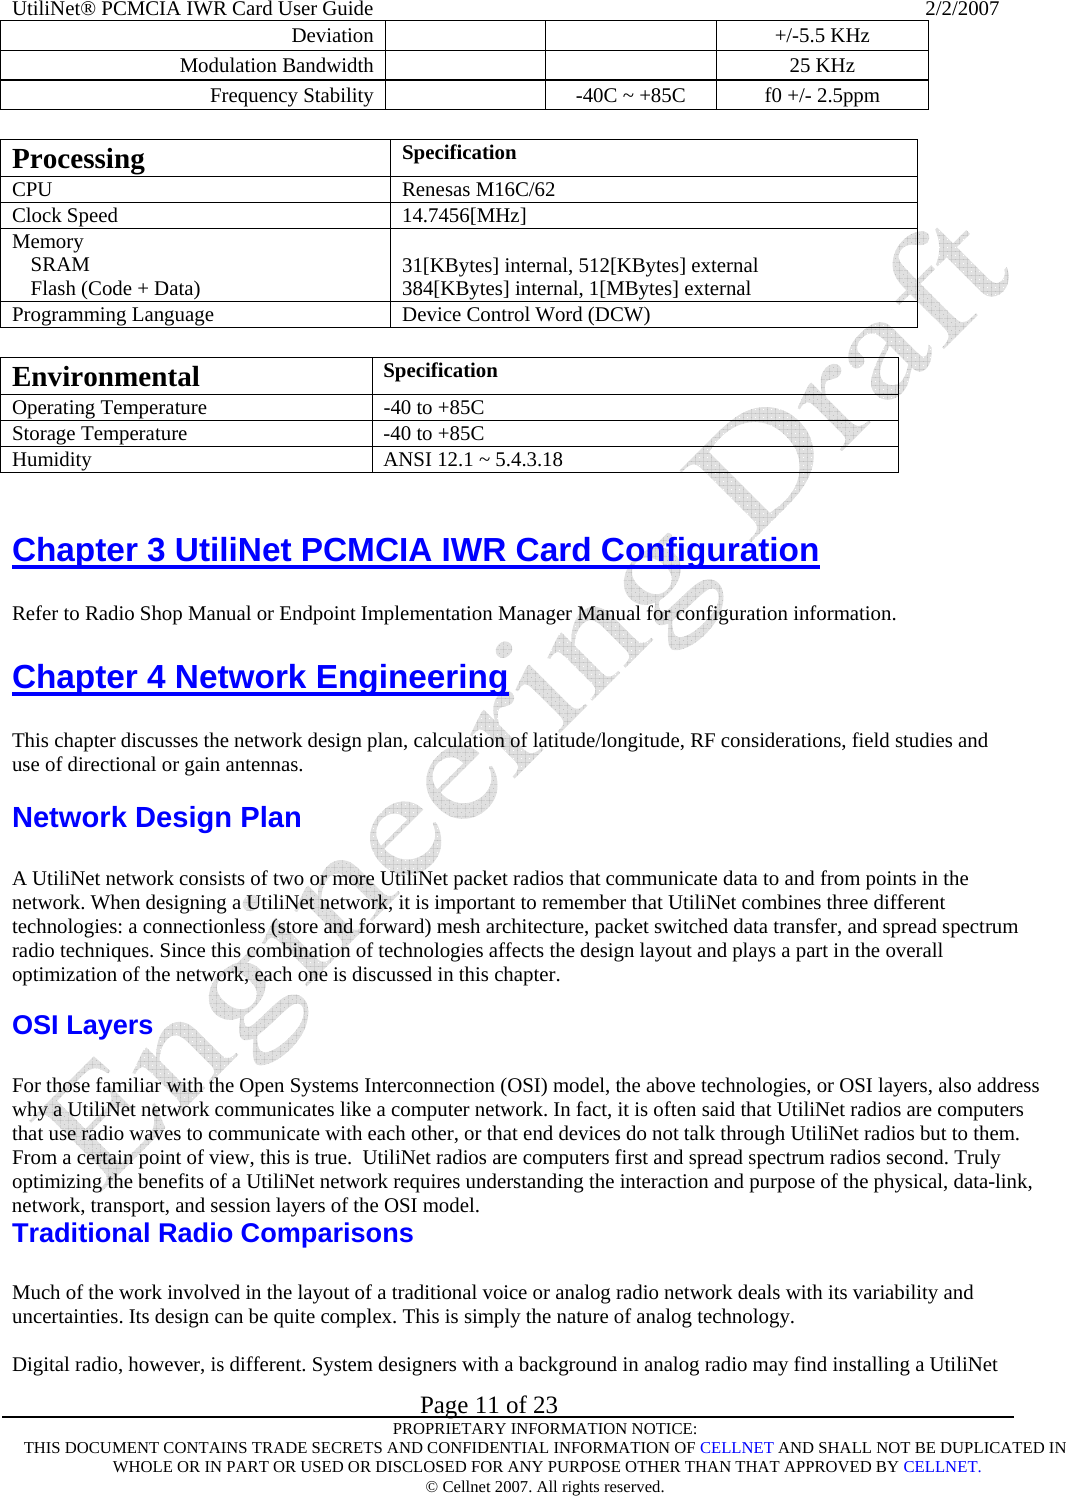 UtiliNet® PCMCIA IWR Card User Guide                                                                                                          2/2/2007   Page 11 of 23     PROPRIETARY INFORMATION NOTICE: THIS DOCUMENT CONTAINS TRADE SECRETS AND CONFIDENTIAL INFORMATION OF CELLNET AND SHALL NOT BE DUPLICATED IN  WHOLE OR IN PART OR USED OR DISCLOSED FOR ANY PURPOSE OTHER THAN THAT APPROVED BY CELLNET. © Cellnet 2007. All rights reserved. Deviation     +/-5.5 KHz  Modulation Bandwidth    25 KHz  Frequency Stability   -40C ~ +85C   f0 +/- 2.5ppm   Processing  Specification  CPU   Renesas M16C/62  Clock Speed   14.7456[MHz]  Memory  SRAM   Flash (Code + Data)   31[KBytes] internal, 512[KBytes] external 384[KBytes] internal, 1[MBytes] external Programming Language   Device Control Word (DCW)   Environmental  Specification  Operating Temperature   -40 to +85C  Storage Temperature   -40 to +85C  Humidity   ANSI 12.1 ~ 5.4.3.18    Chapter 3 UtiliNet PCMCIA IWR Card Configuration  Refer to Radio Shop Manual or Endpoint Implementation Manager Manual for configuration information. Chapter 4 Network Engineering  This chapter discusses the network design plan, calculation of latitude/longitude, RF considerations, field studies and use of directional or gain antennas.  Network Design Plan  A UtiliNet network consists of two or more UtiliNet packet radios that communicate data to and from points in the network. When designing a UtiliNet network, it is important to remember that UtiliNet combines three different technologies: a connectionless (store and forward) mesh architecture, packet switched data transfer, and spread spectrum radio techniques. Since this combination of technologies affects the design layout and plays a part in the overall optimization of the network, each one is discussed in this chapter.  OSI Layers  For those familiar with the Open Systems Interconnection (OSI) model, the above technologies, or OSI layers, also address why a UtiliNet network communicates like a computer network. In fact, it is often said that UtiliNet radios are computers that use radio waves to communicate with each other, or that end devices do not talk through UtiliNet radios but to them. From a certain point of view, this is true.  UtiliNet radios are computers first and spread spectrum radios second. Truly optimizing the benefits of a UtiliNet network requires understanding the interaction and purpose of the physical, data-link, network, transport, and session layers of the OSI model.  Traditional Radio Comparisons  Much of the work involved in the layout of a traditional voice or analog radio network deals with its variability and uncertainties. Its design can be quite complex. This is simply the nature of analog technology.  Digital radio, however, is different. System designers with a background in analog radio may find installing a UtiliNet 